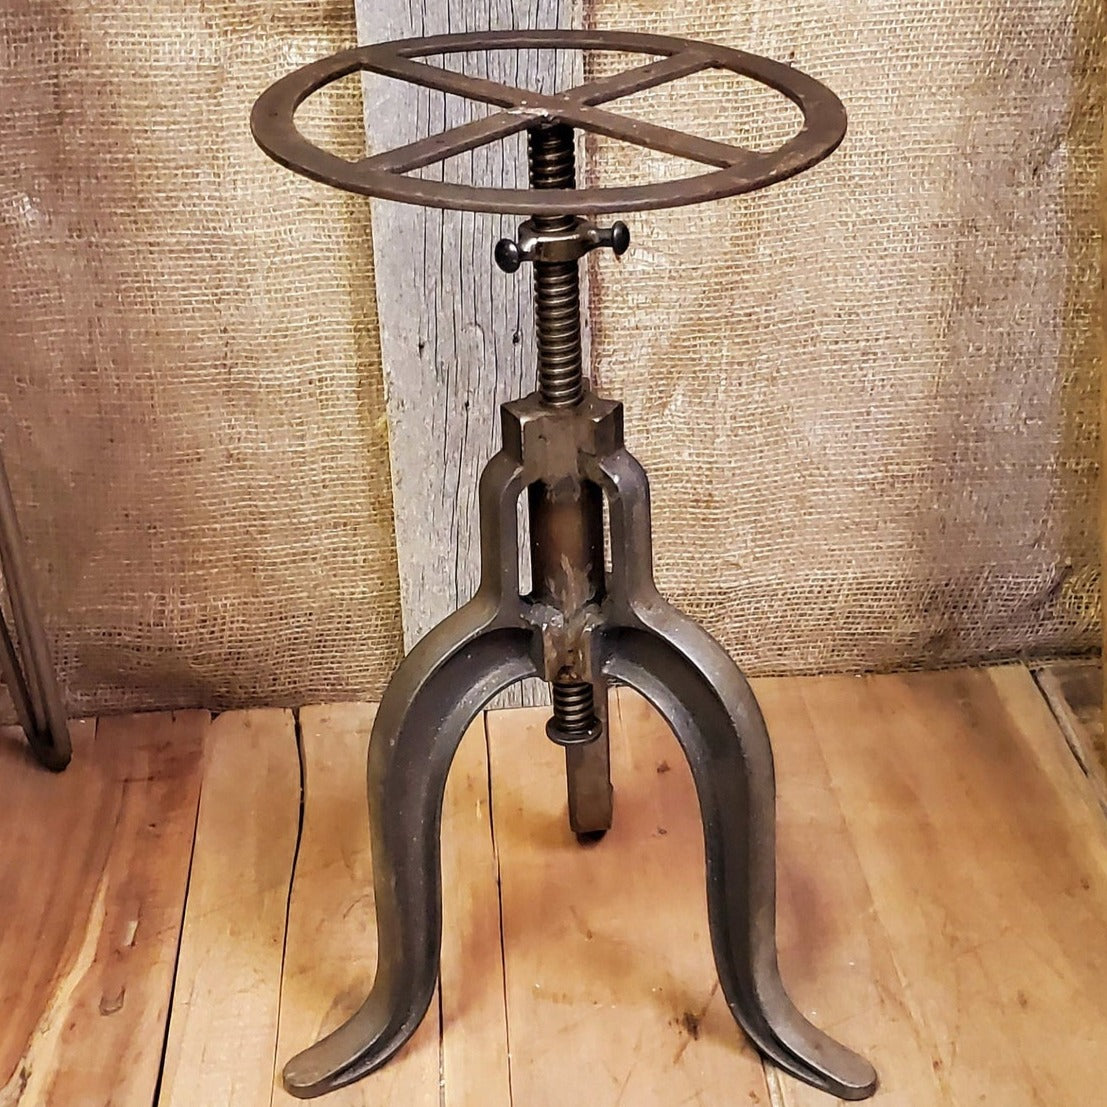 The 'Jameson' - Vintage Cast Iron Swivel Stool (No Top) - Spearhead Collection - Stools - Seating